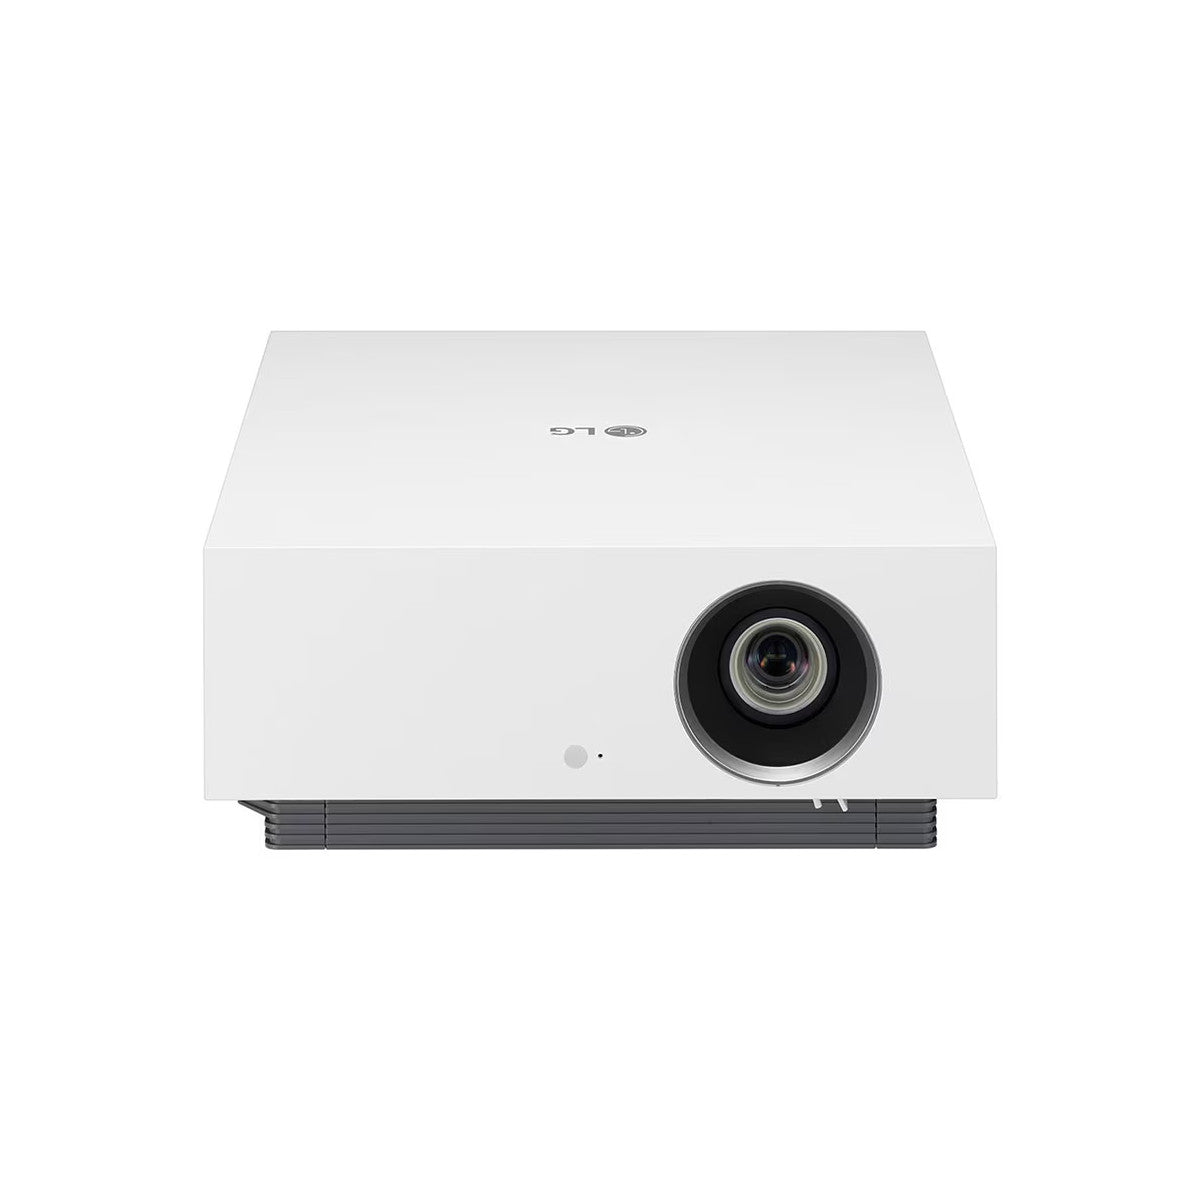 LG AU810PW 4K UHD Laser Smart Home Theater CineBeam Projector - Ooberpad India